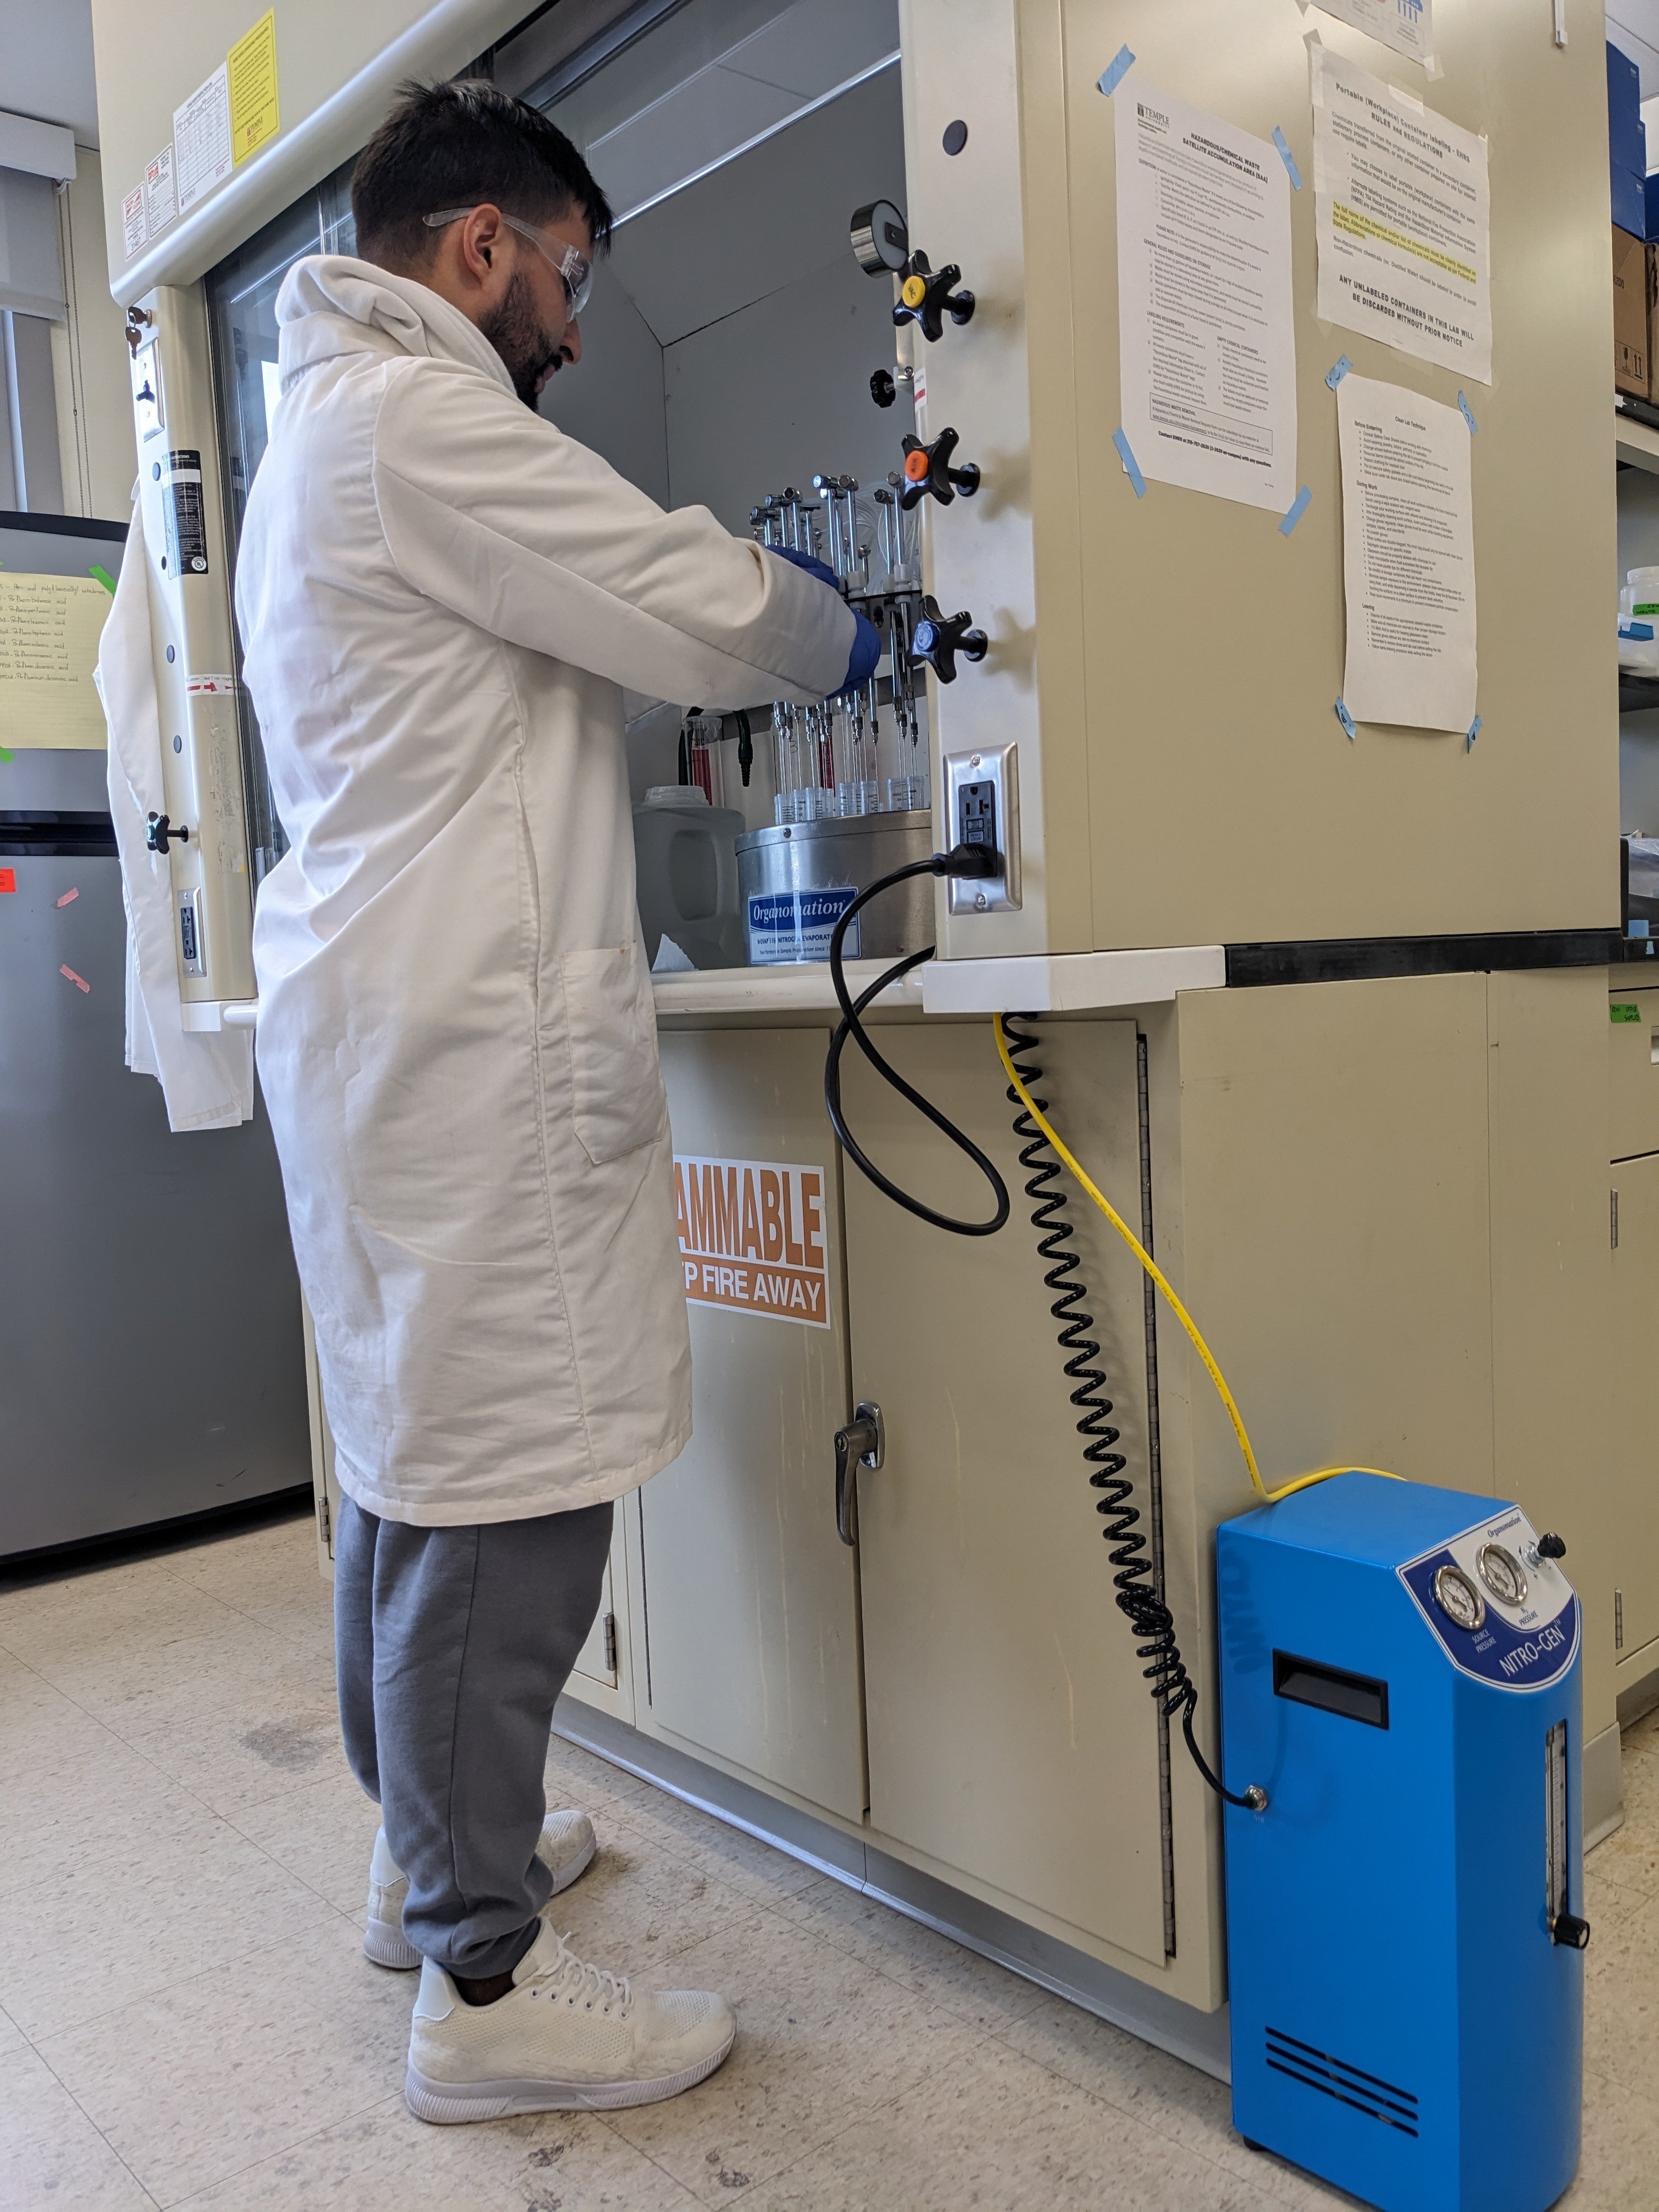 Lab tech from Temple University using an Organomation nitrogen evaporator hooked up to Organomation's NITRO-GEN nitrogen generator